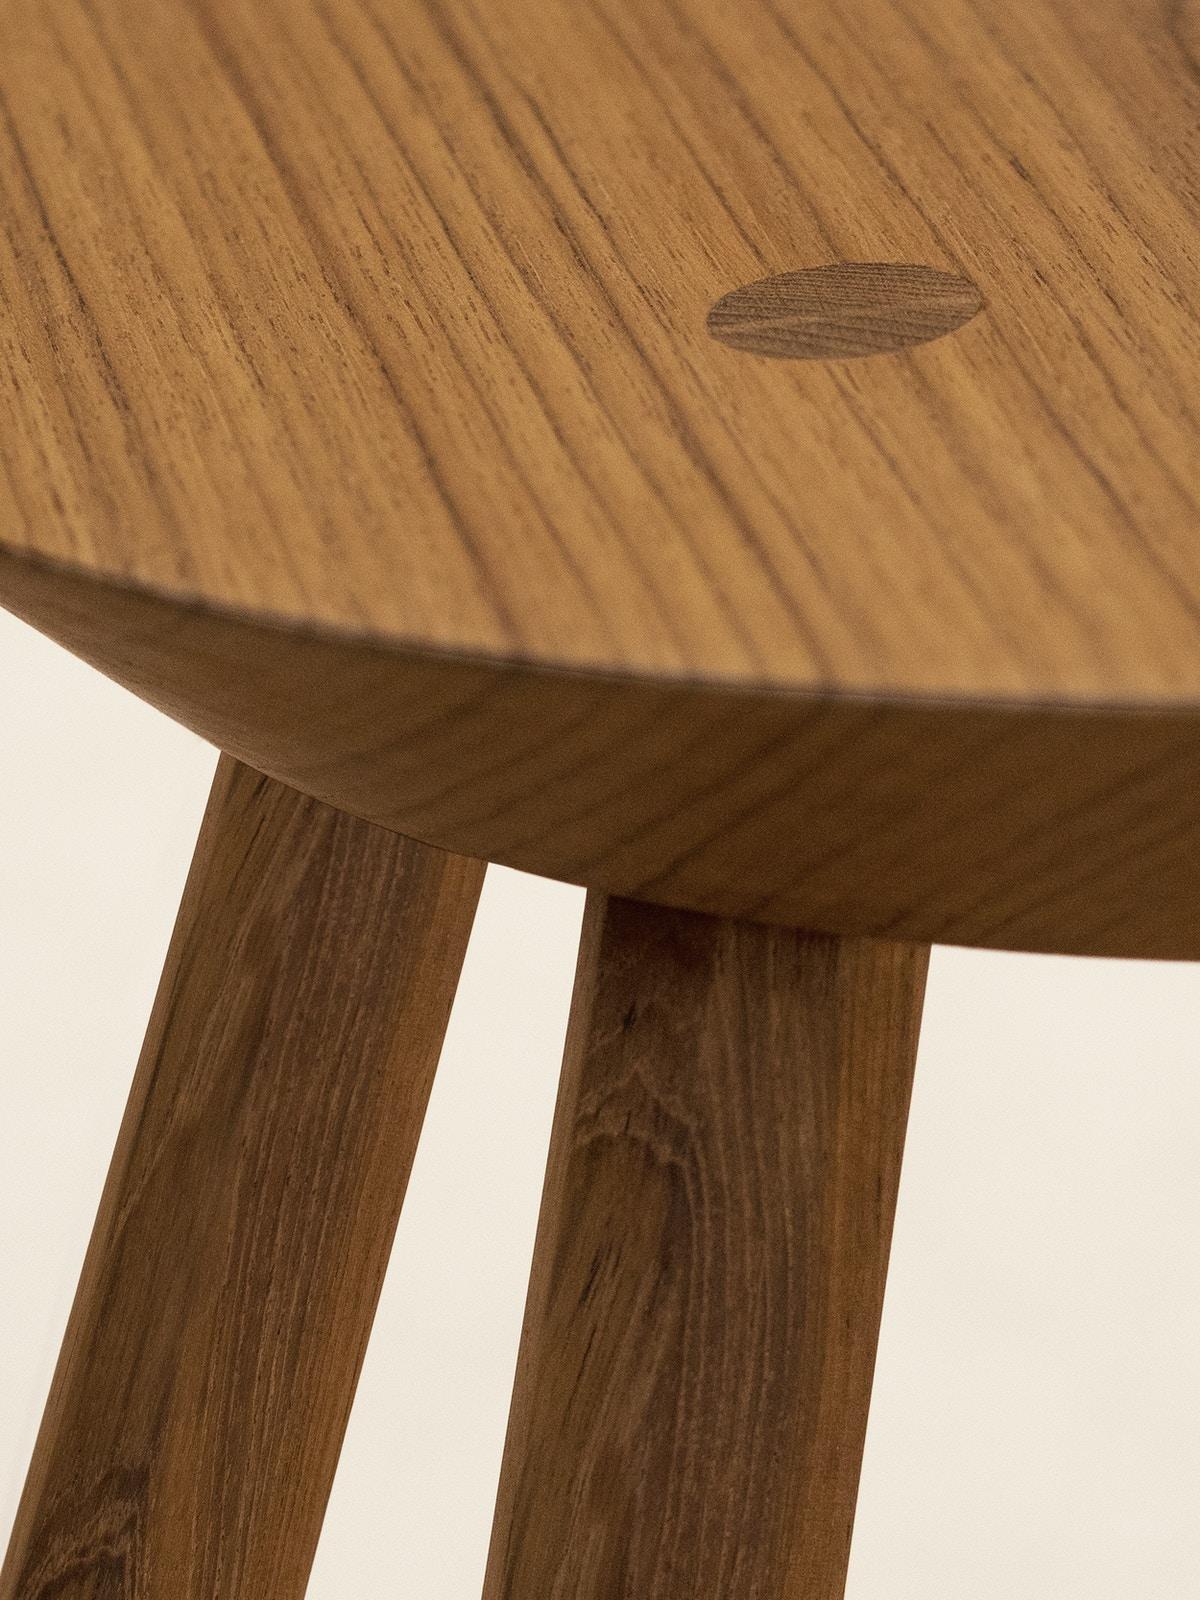 21st Century Designed  Stool Teak Wood Brown In New Condition For Sale In Castelo da Maia, PT